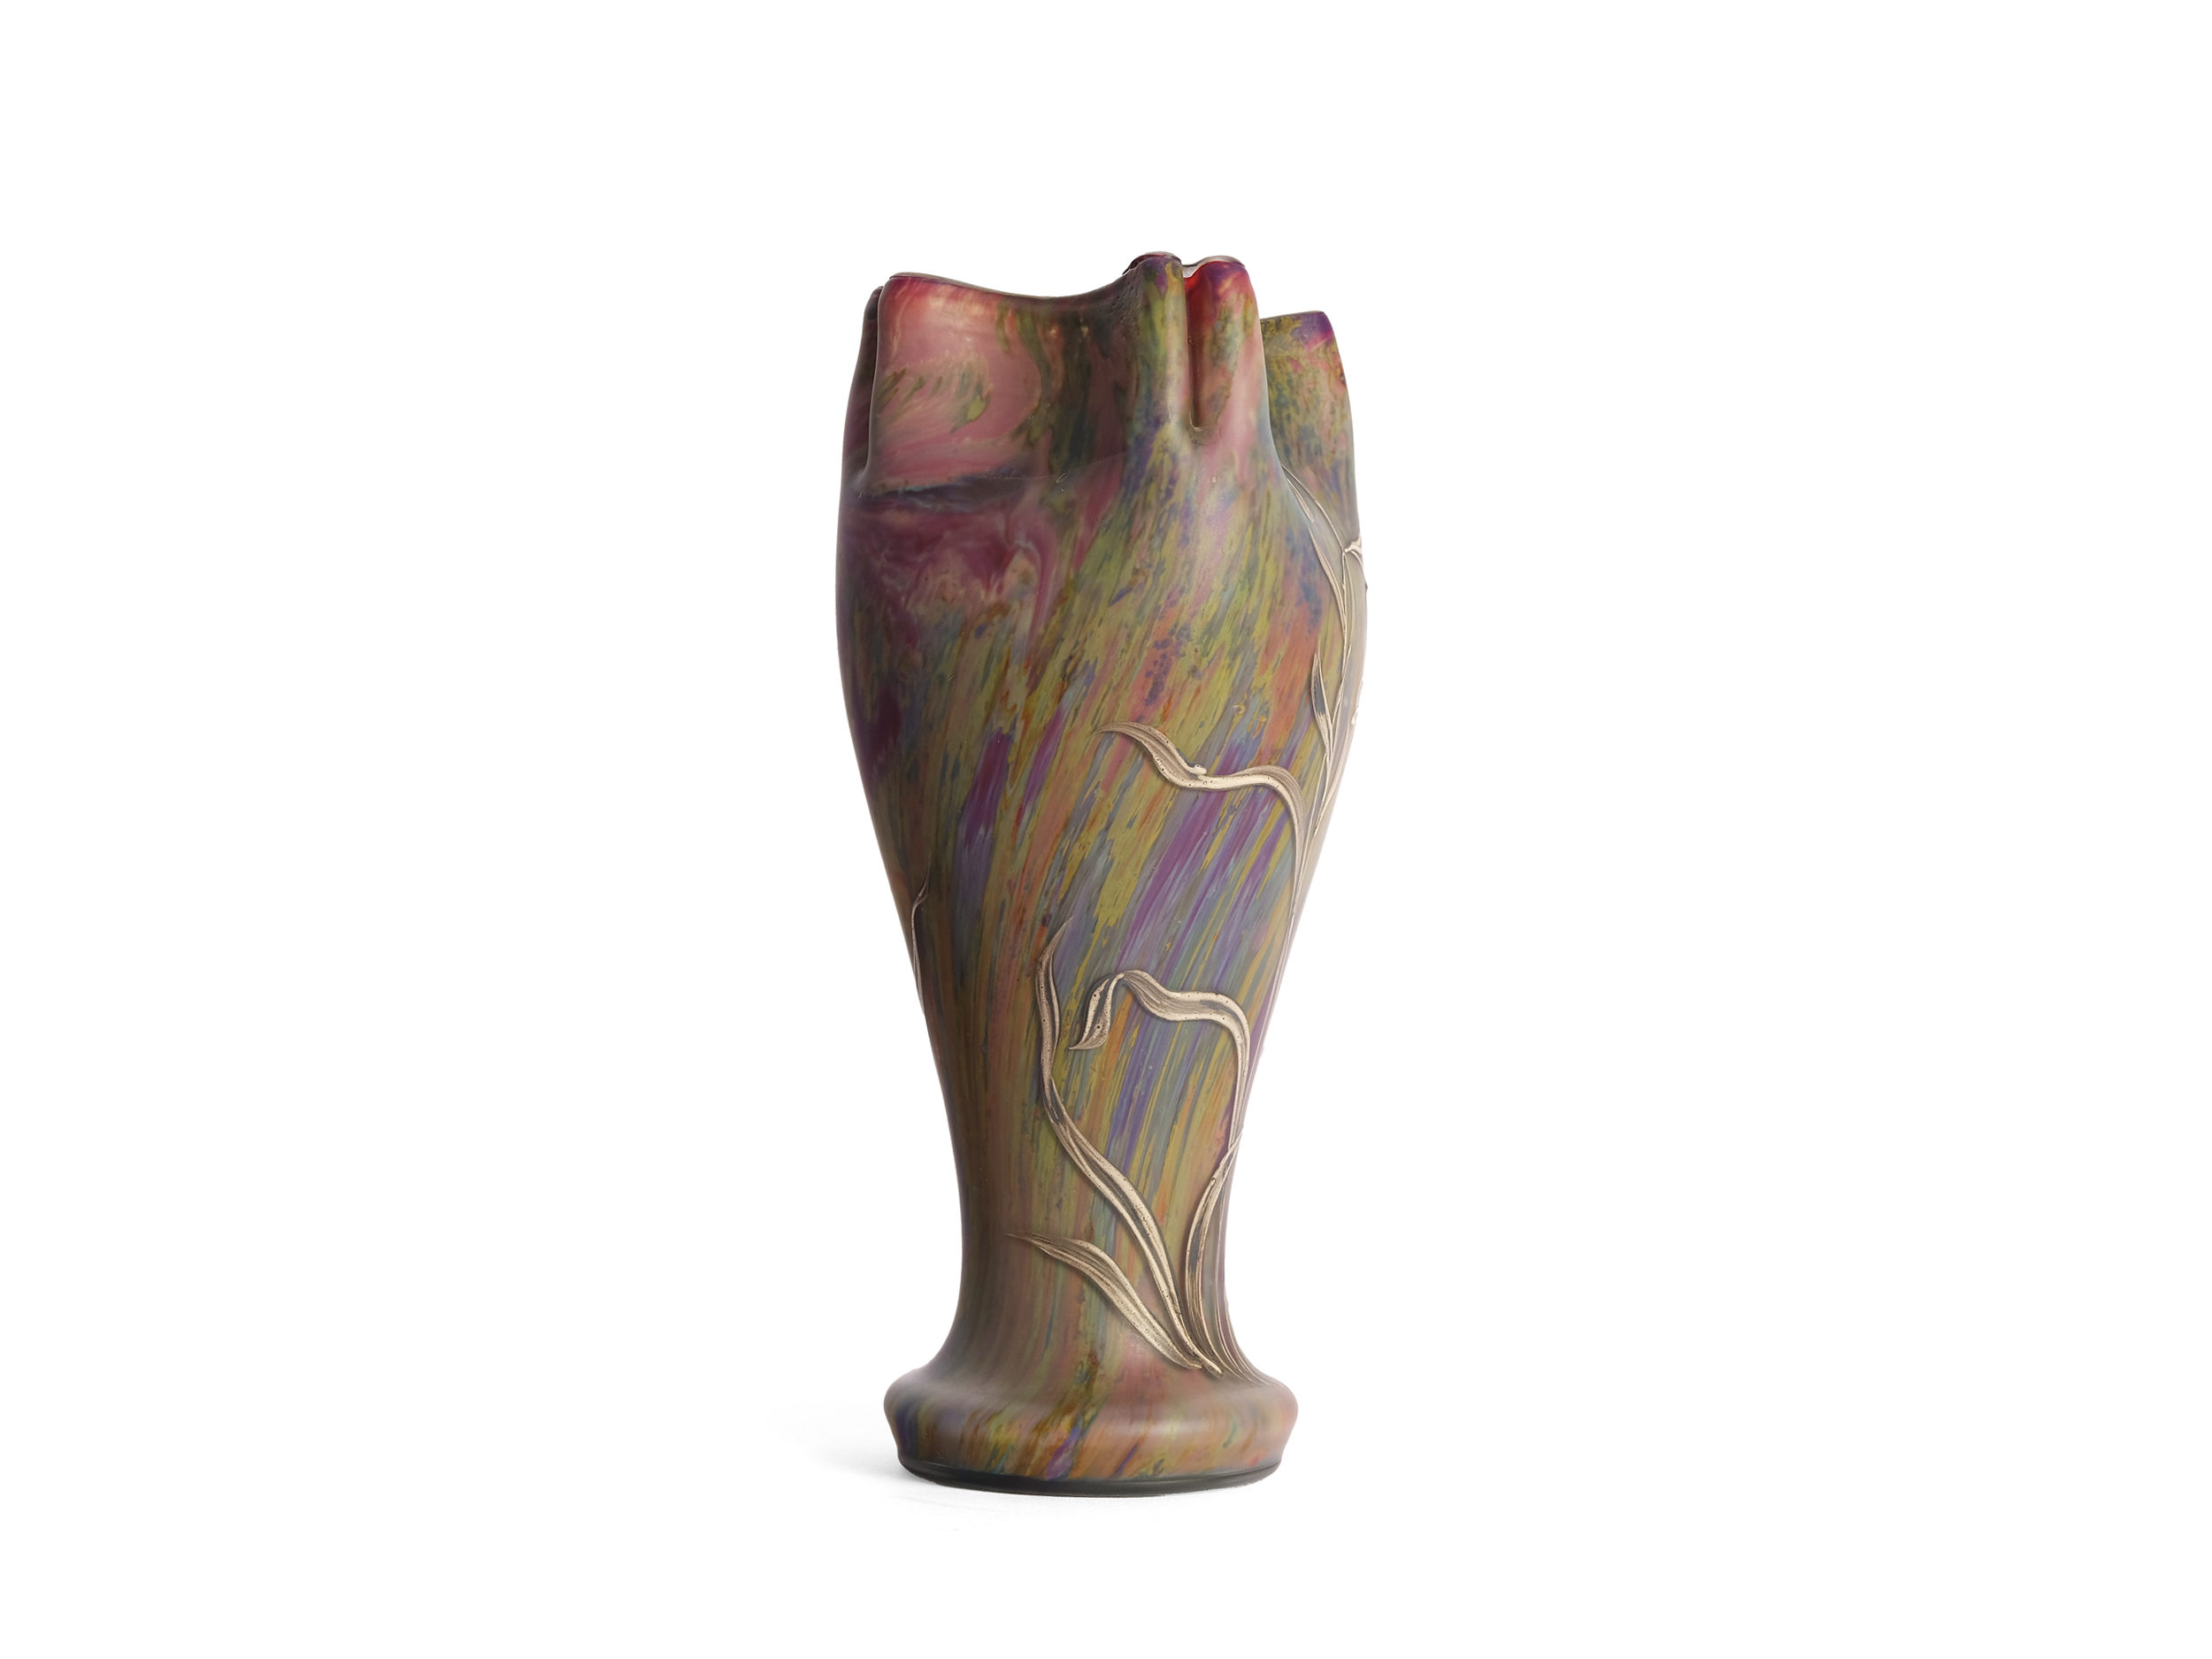 Vase with bellflower in relief, Art Nouveau, around 1900 - Image 2 of 5